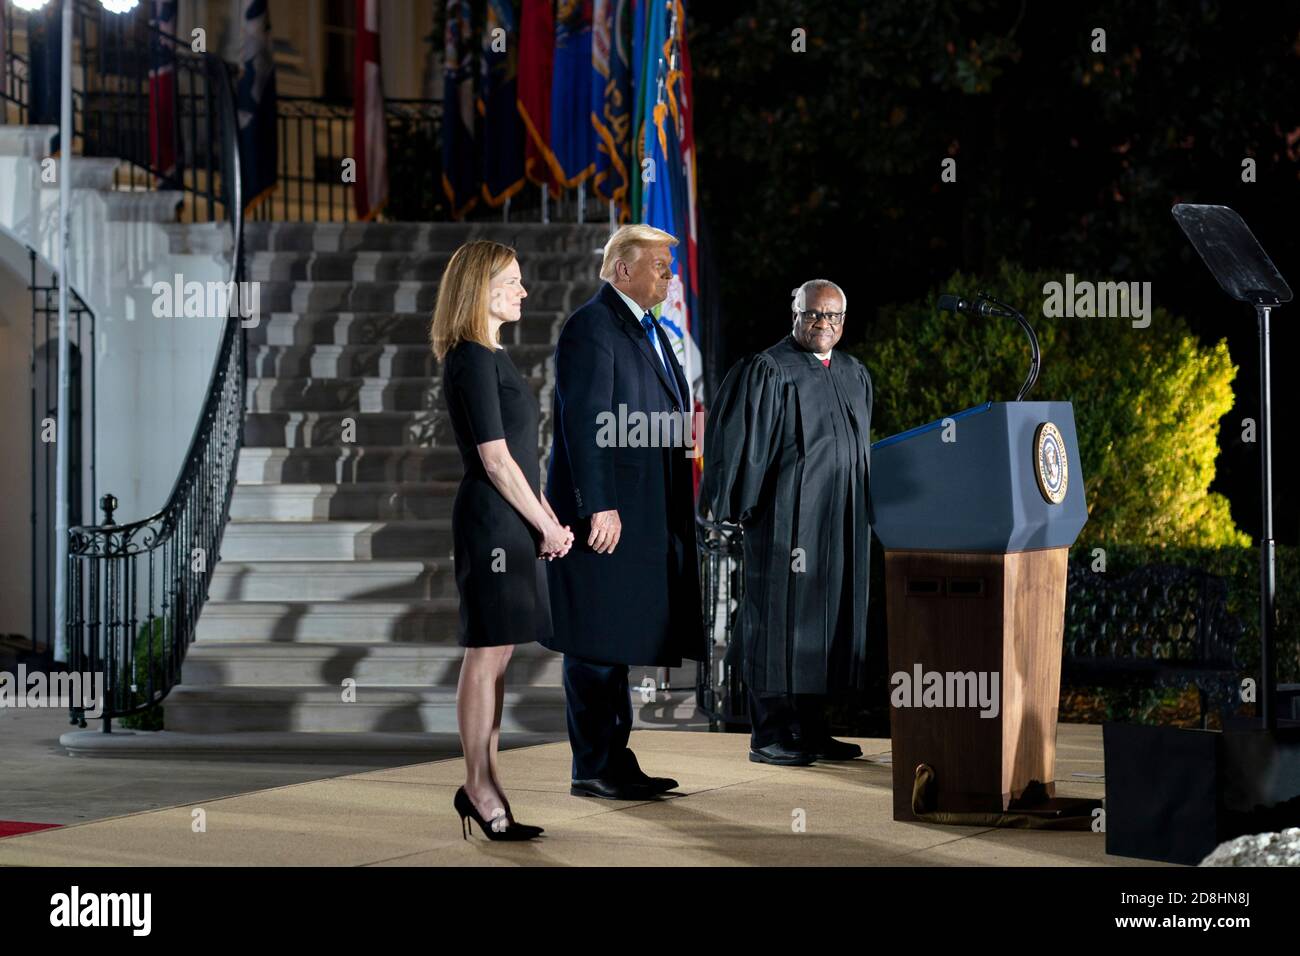 Supreme Court Associate Justice Amy Coney Barrett during her swearing in ceremony on the South Lawn of the White House October 26, 2020 in Washington, DC. Joining Barrett onstage are President Donald Trump and Supreme Court Associate Justice Clarence Thomas. Stock Photo